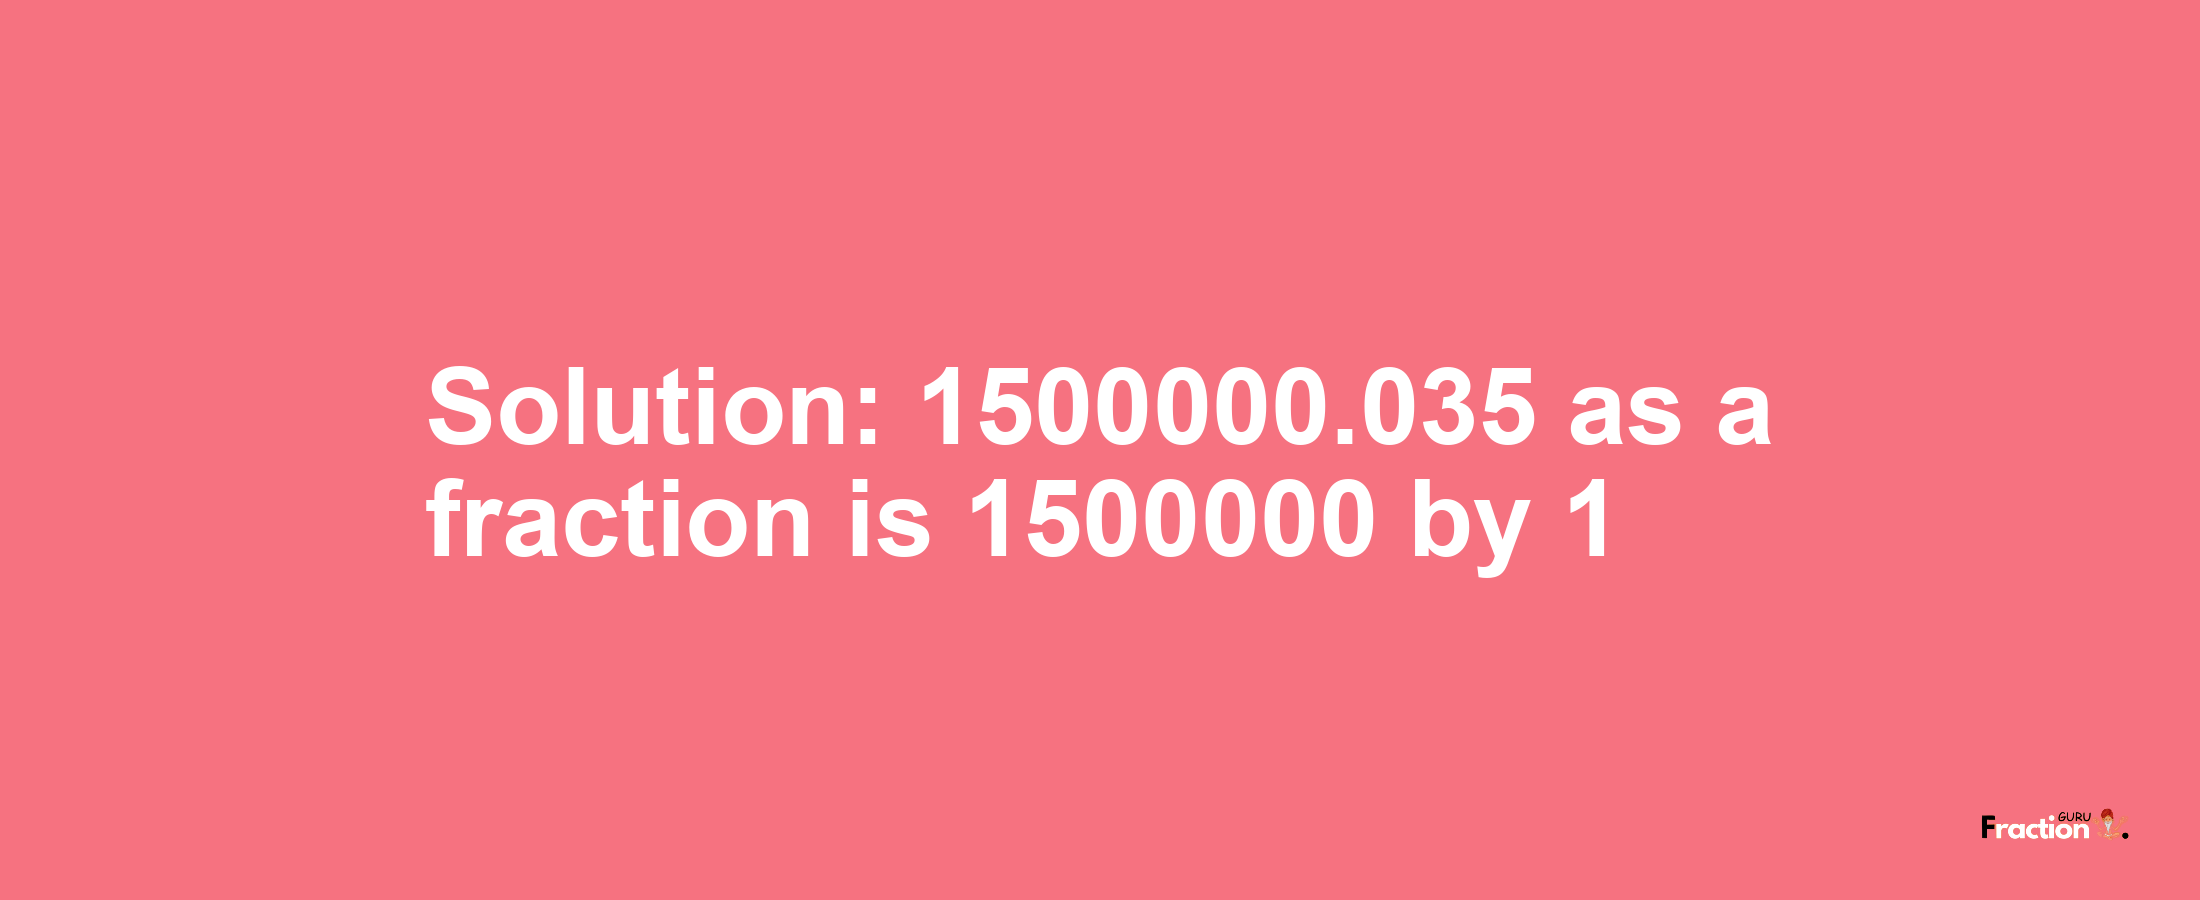 Solution:1500000.035 as a fraction is 1500000/1